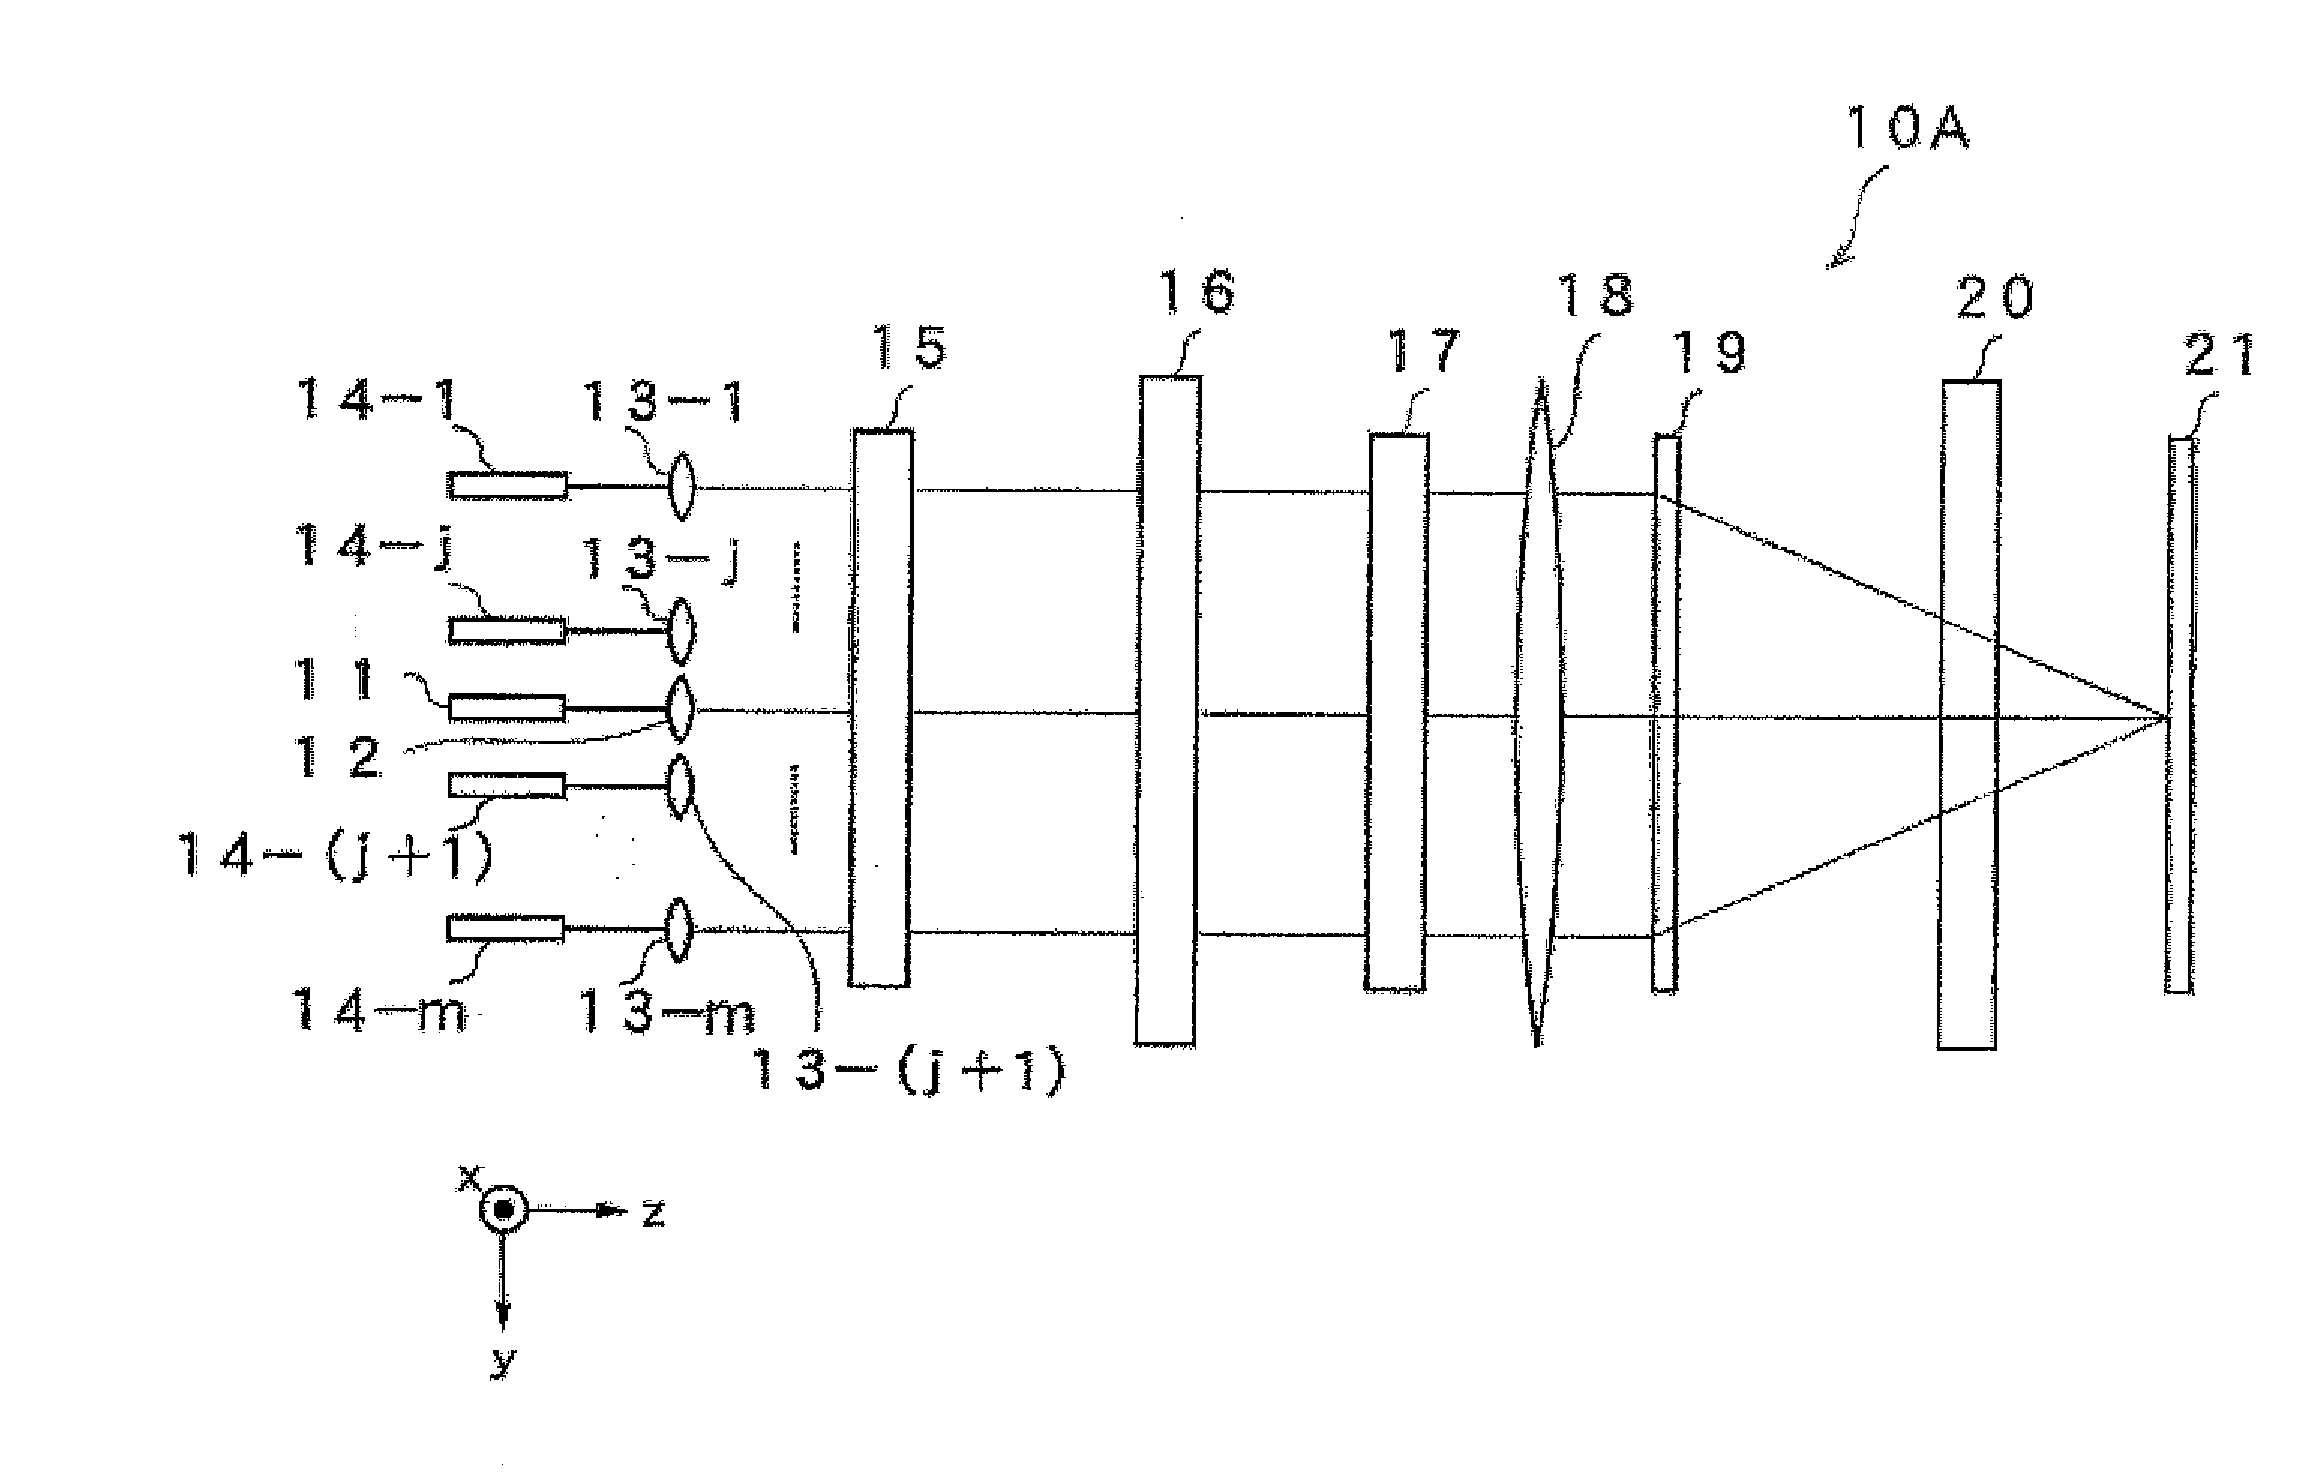 Wavelength selective optical switching devices